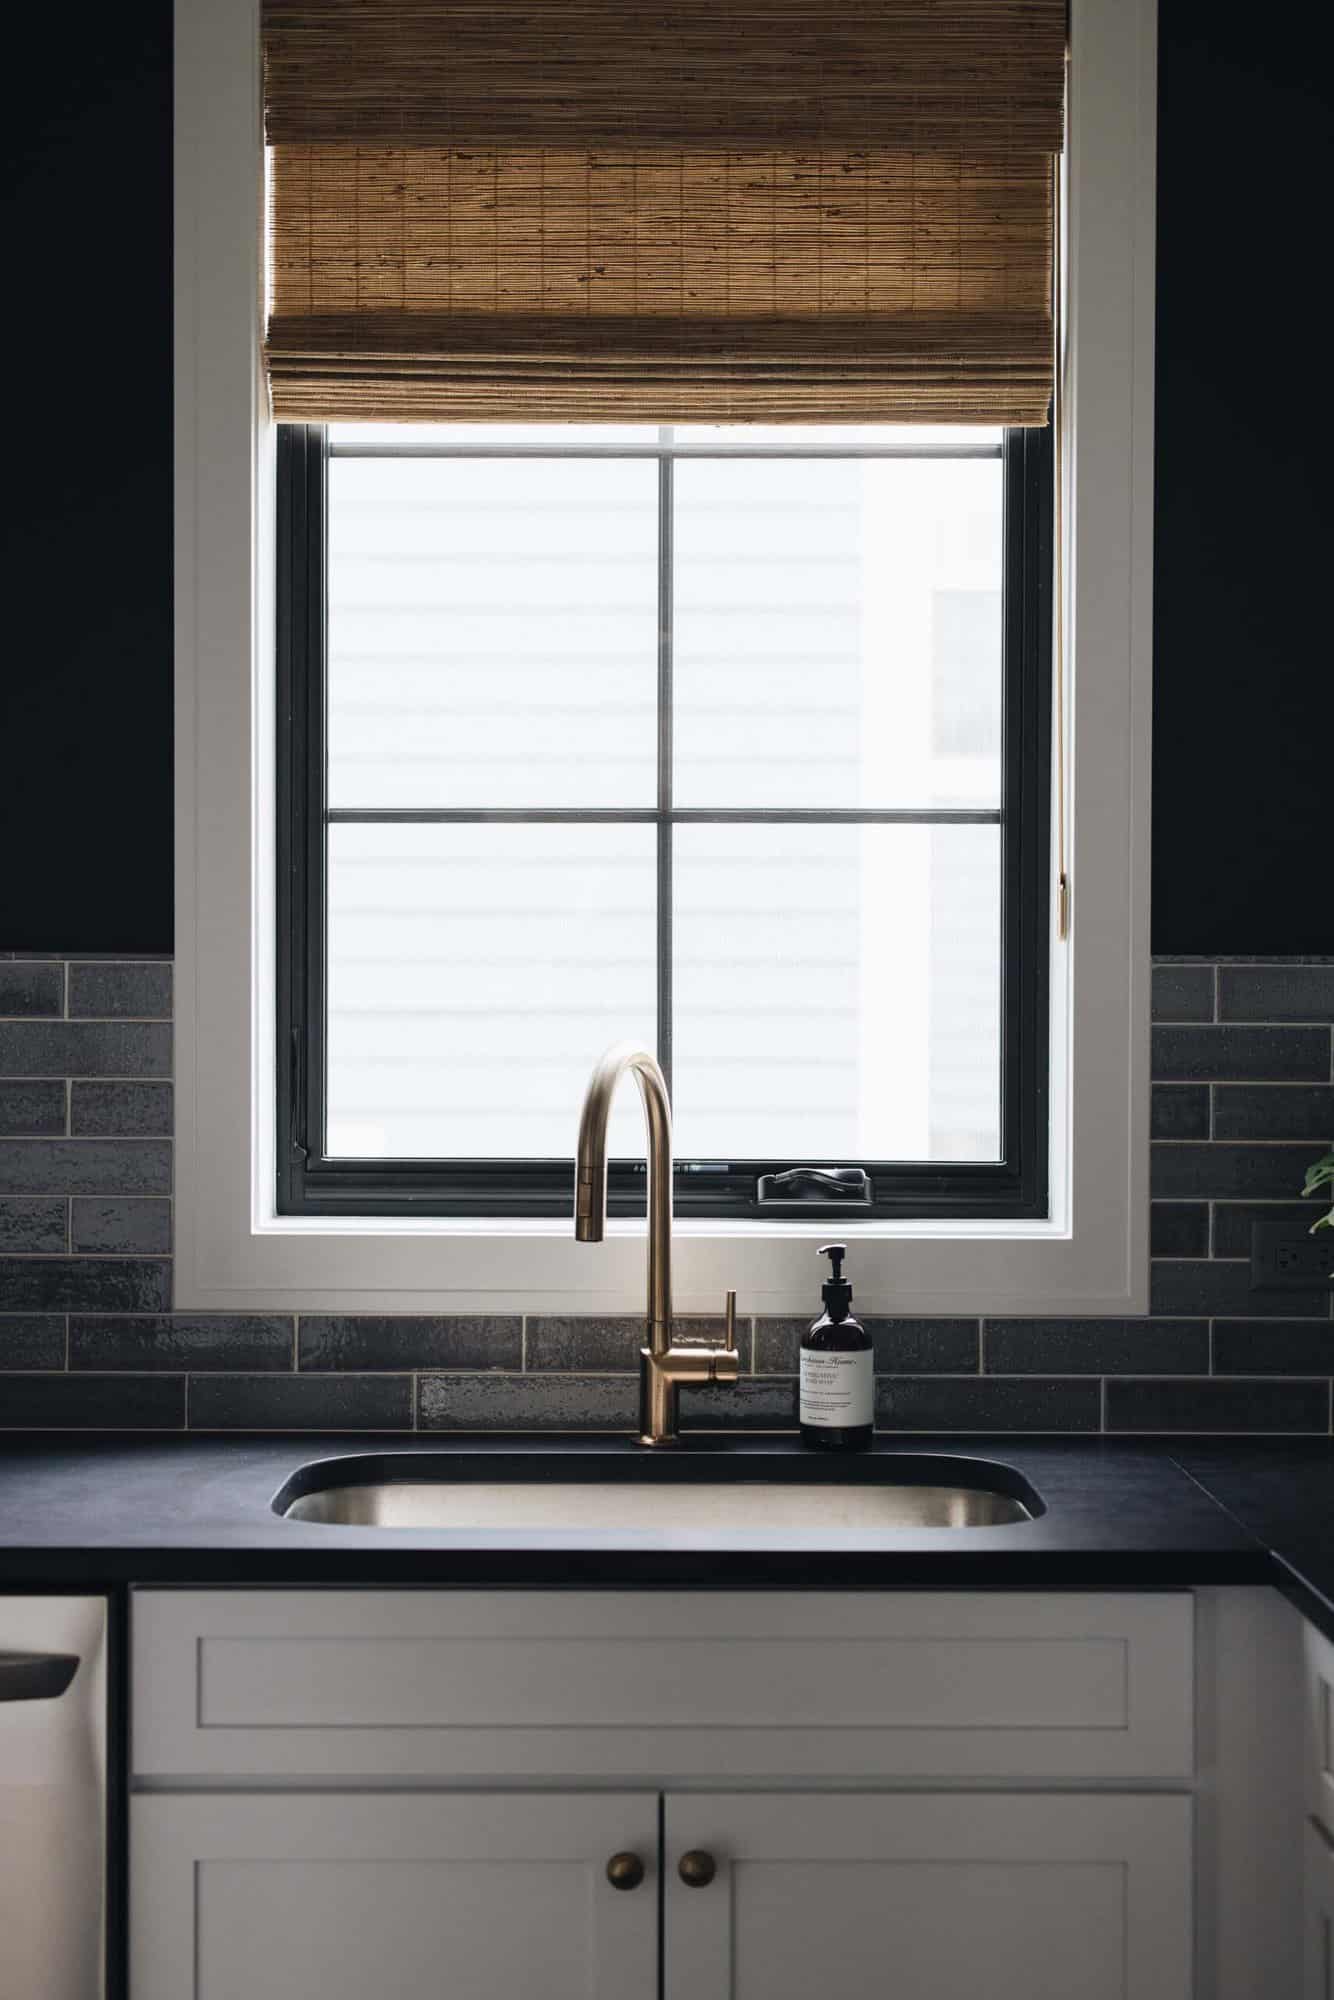 transitional-style-kitchen-window-wall-with-a-sink